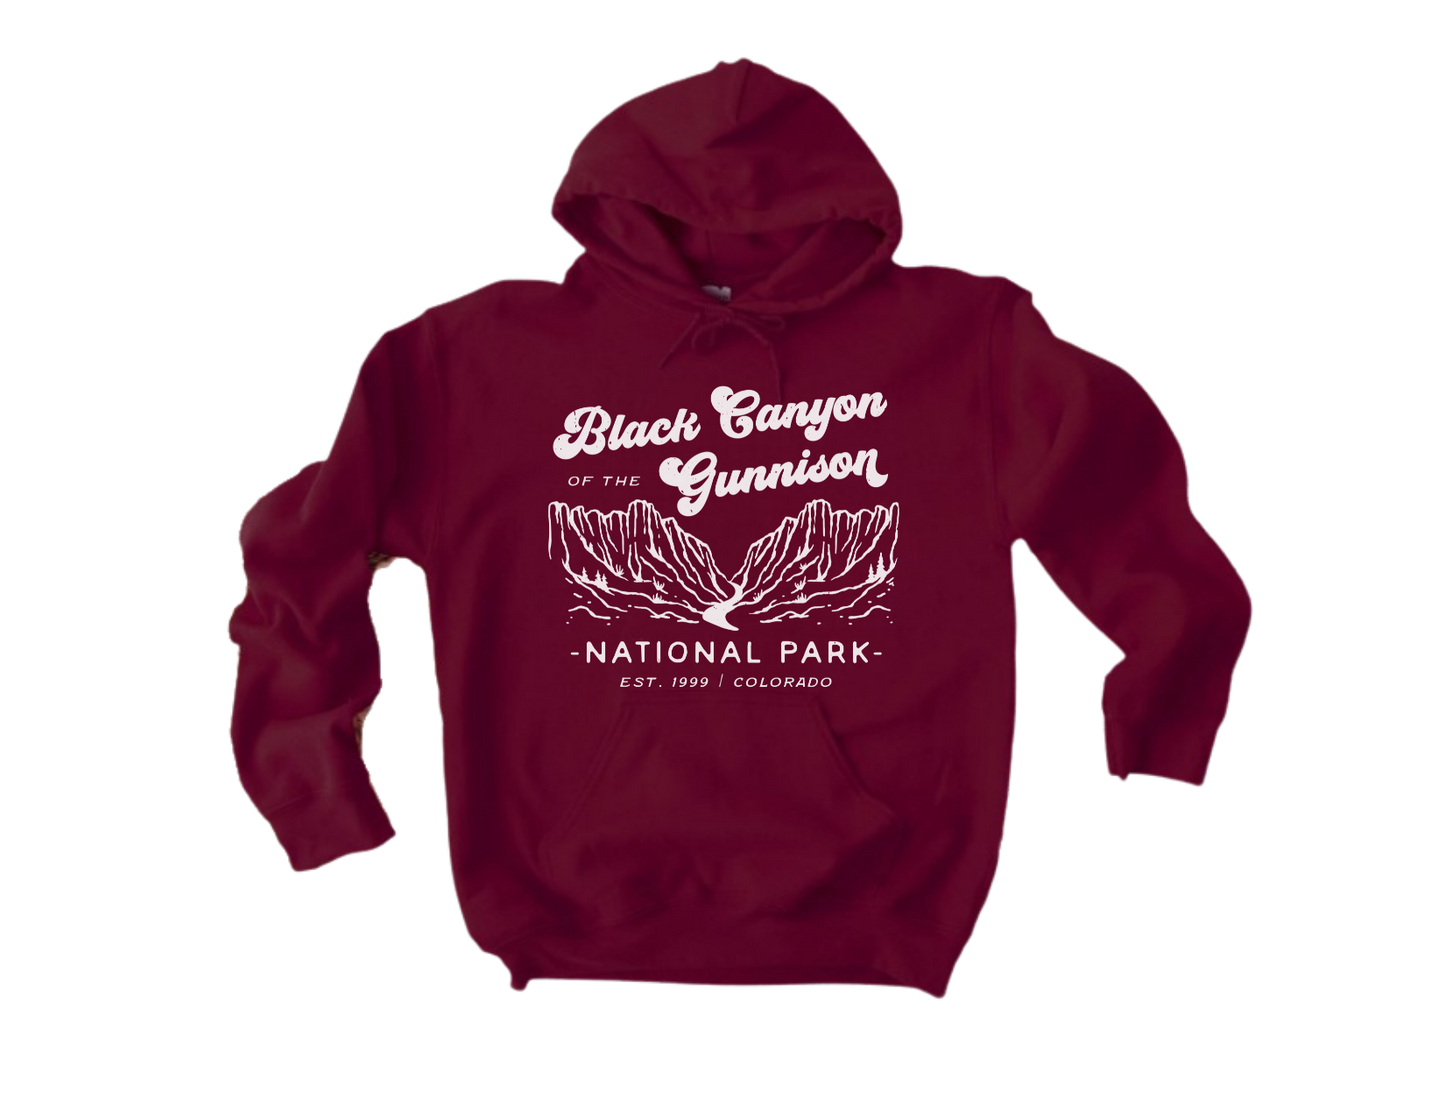 Black Canyon Of The Gunnison National Park Unisex Hoodie